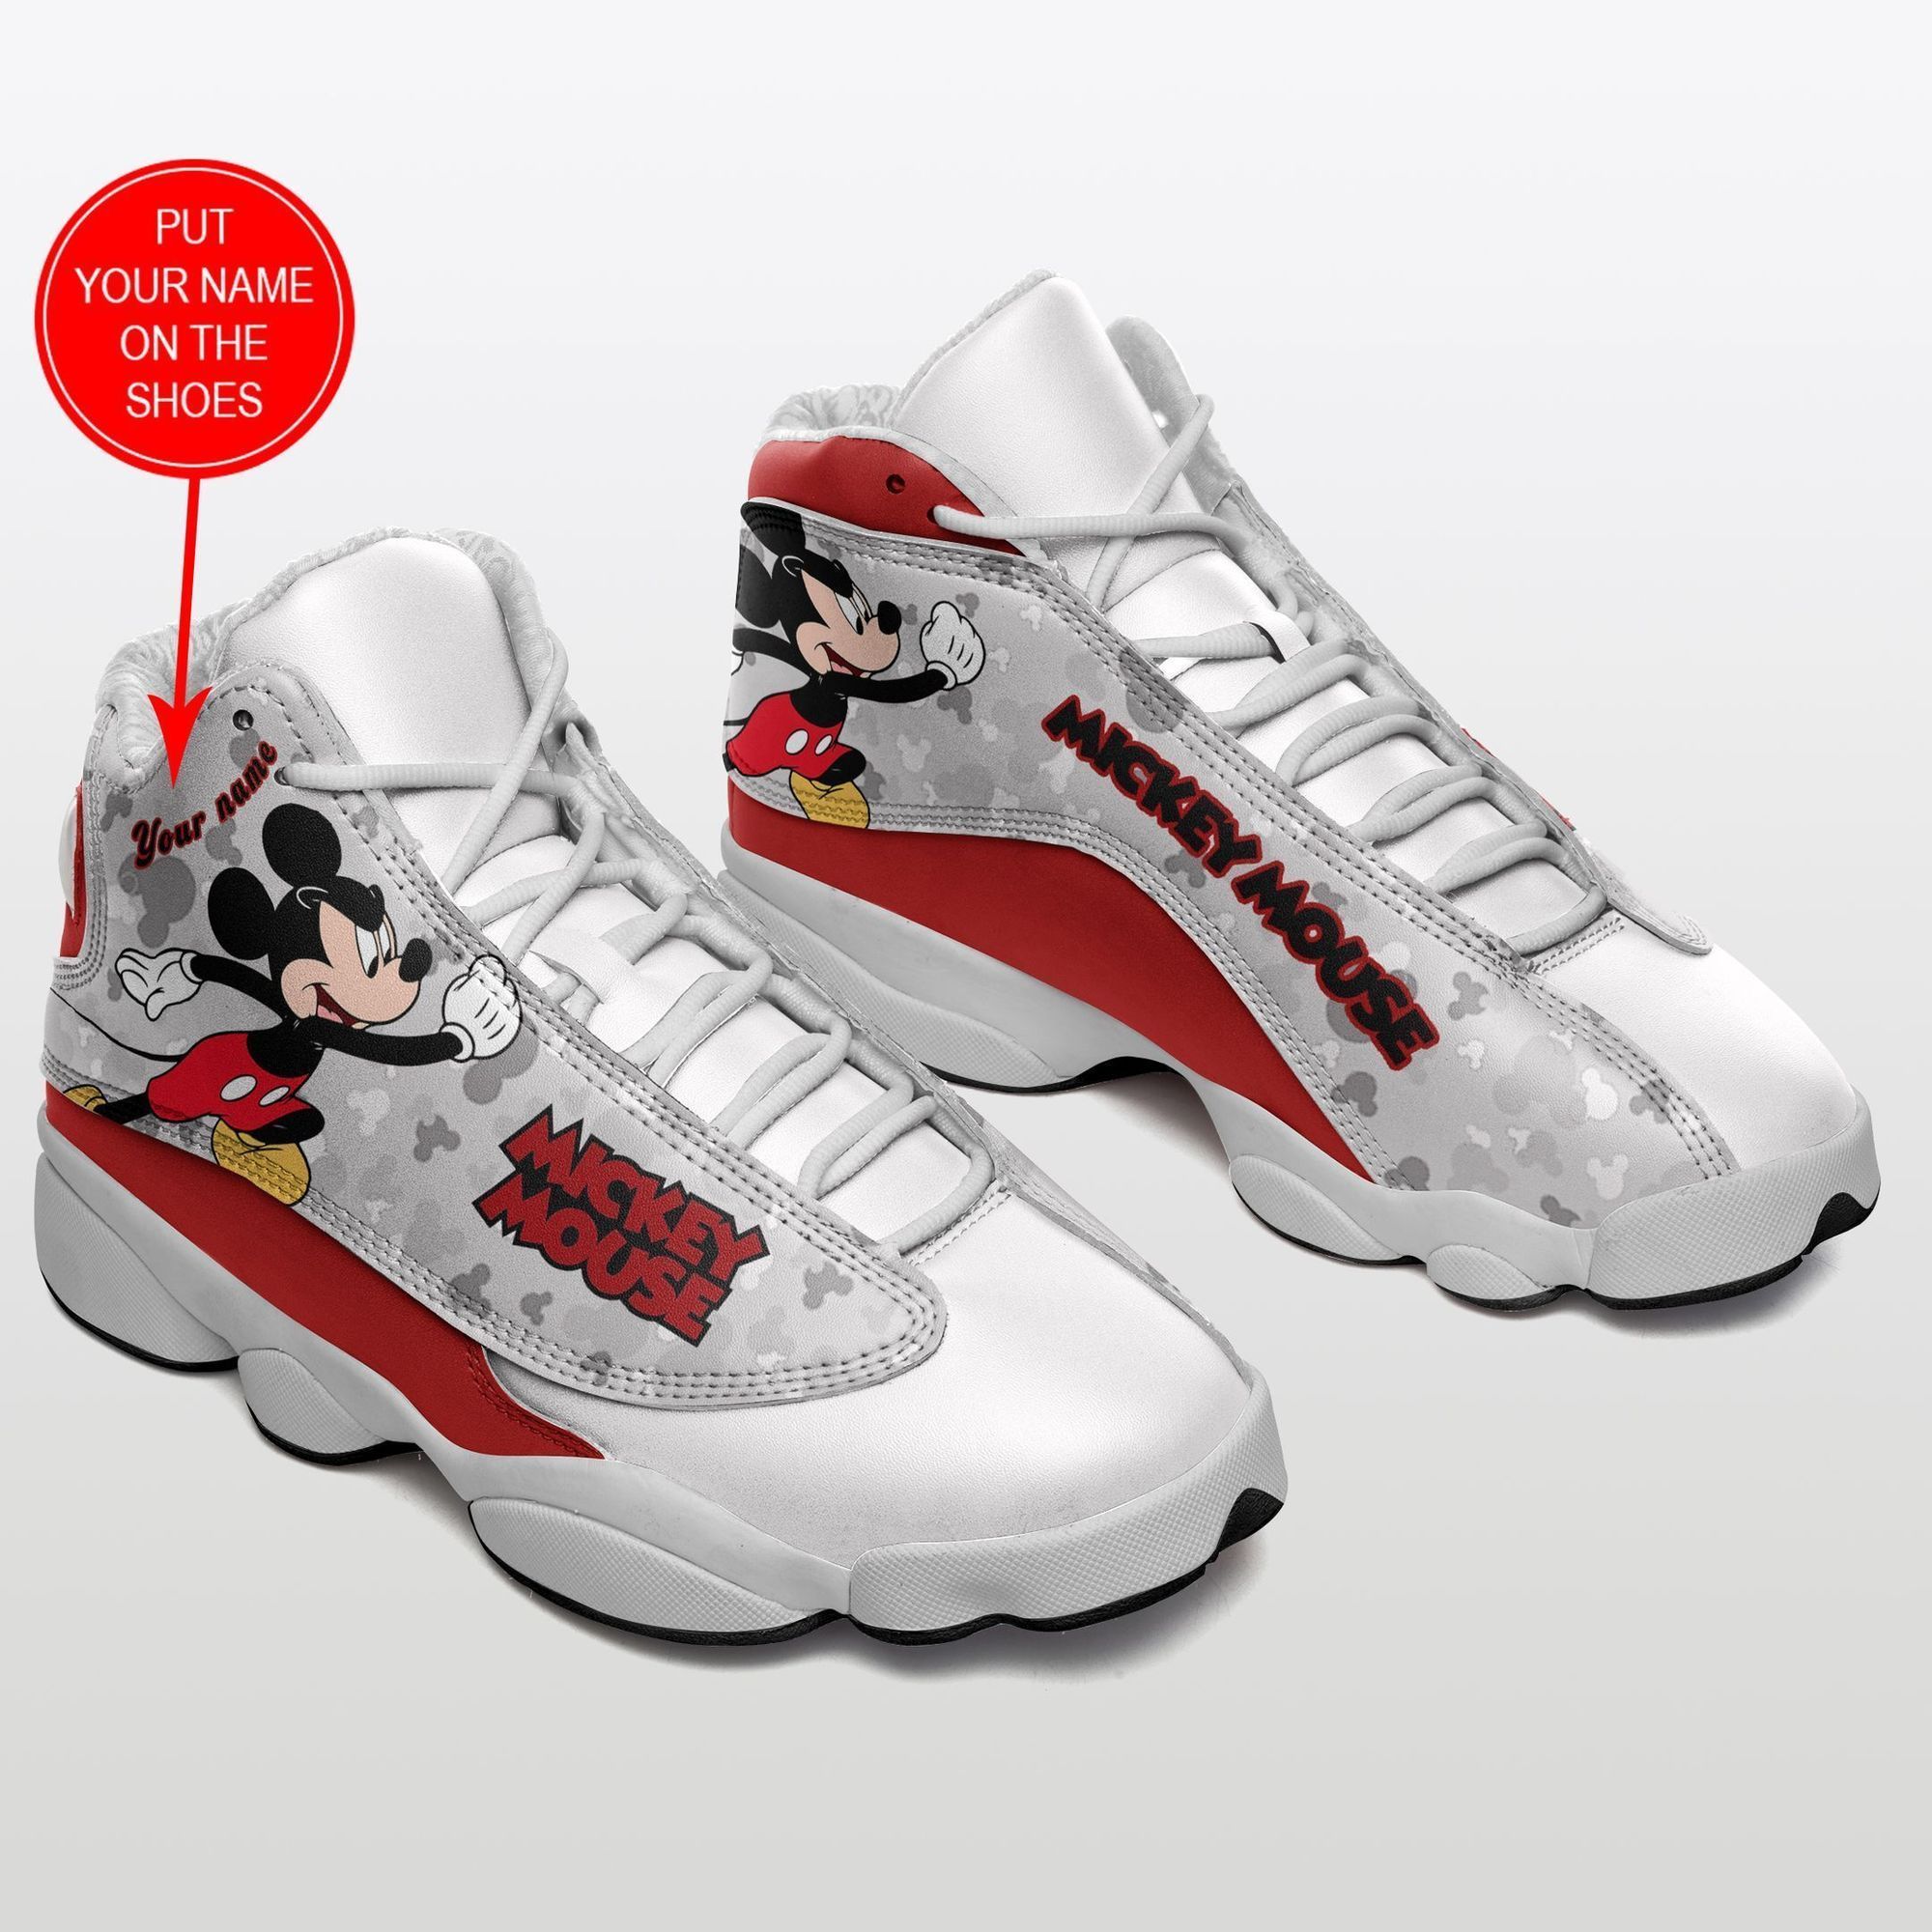 Custom name -disney mickey mouse leather shoes- disney mickey sport shoes- lover gift- printed shoes ver8 air jordan 13 shoes  men and women size  us